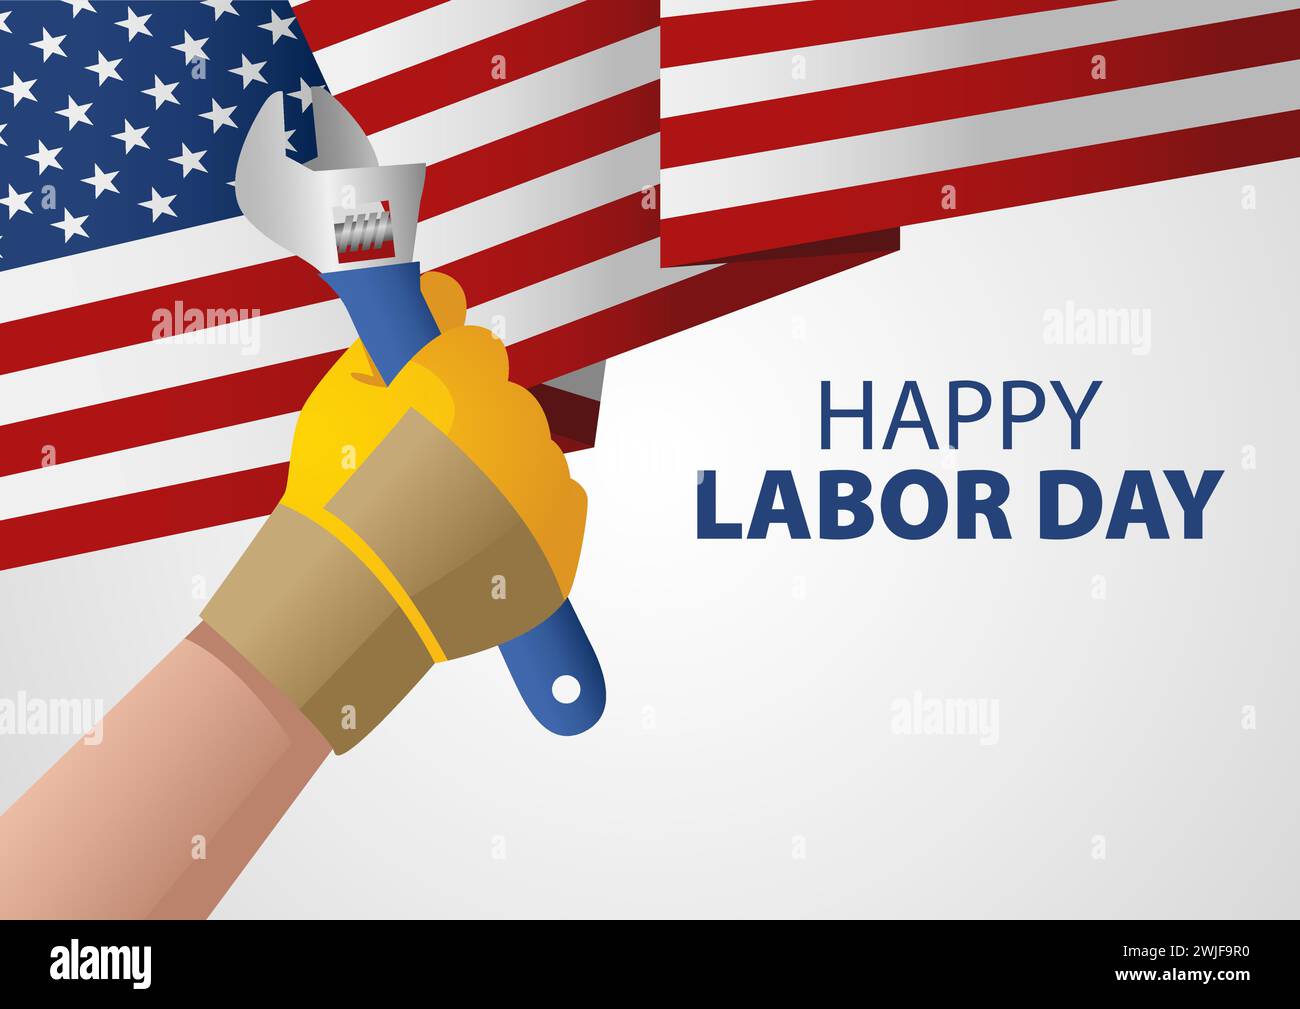 Hand holding a wrench on USA flag, for Labor Day poster or greeting card template, vector illustration Stock Vector